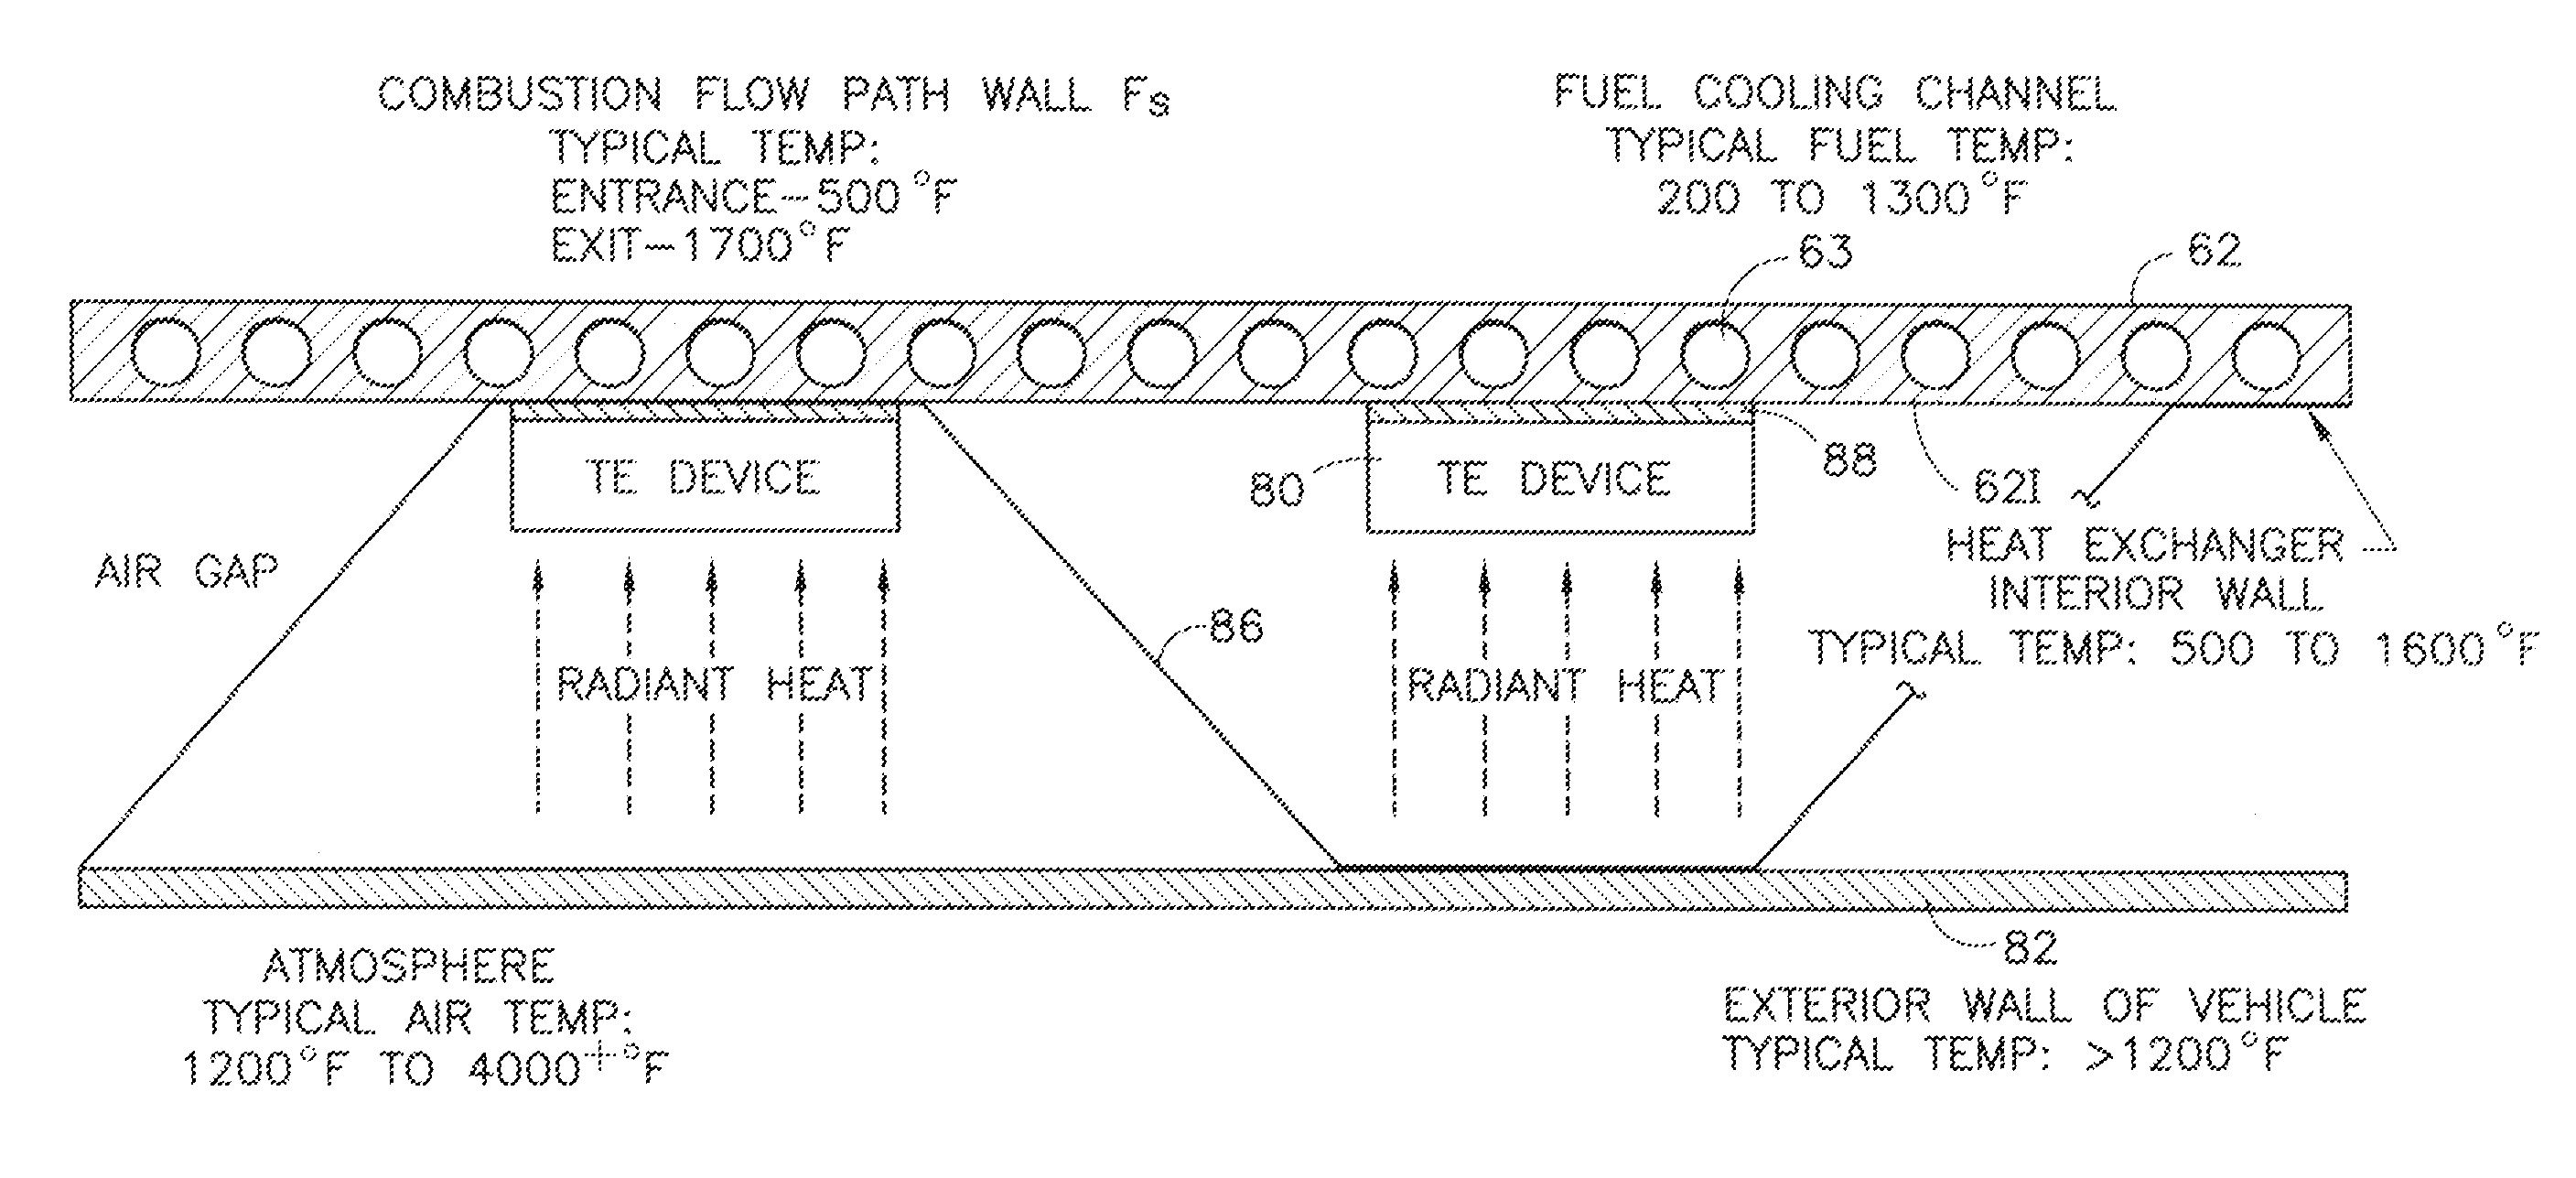 Flowpath heat exchanger for thermal management and power generation within a hypersonic vehicle